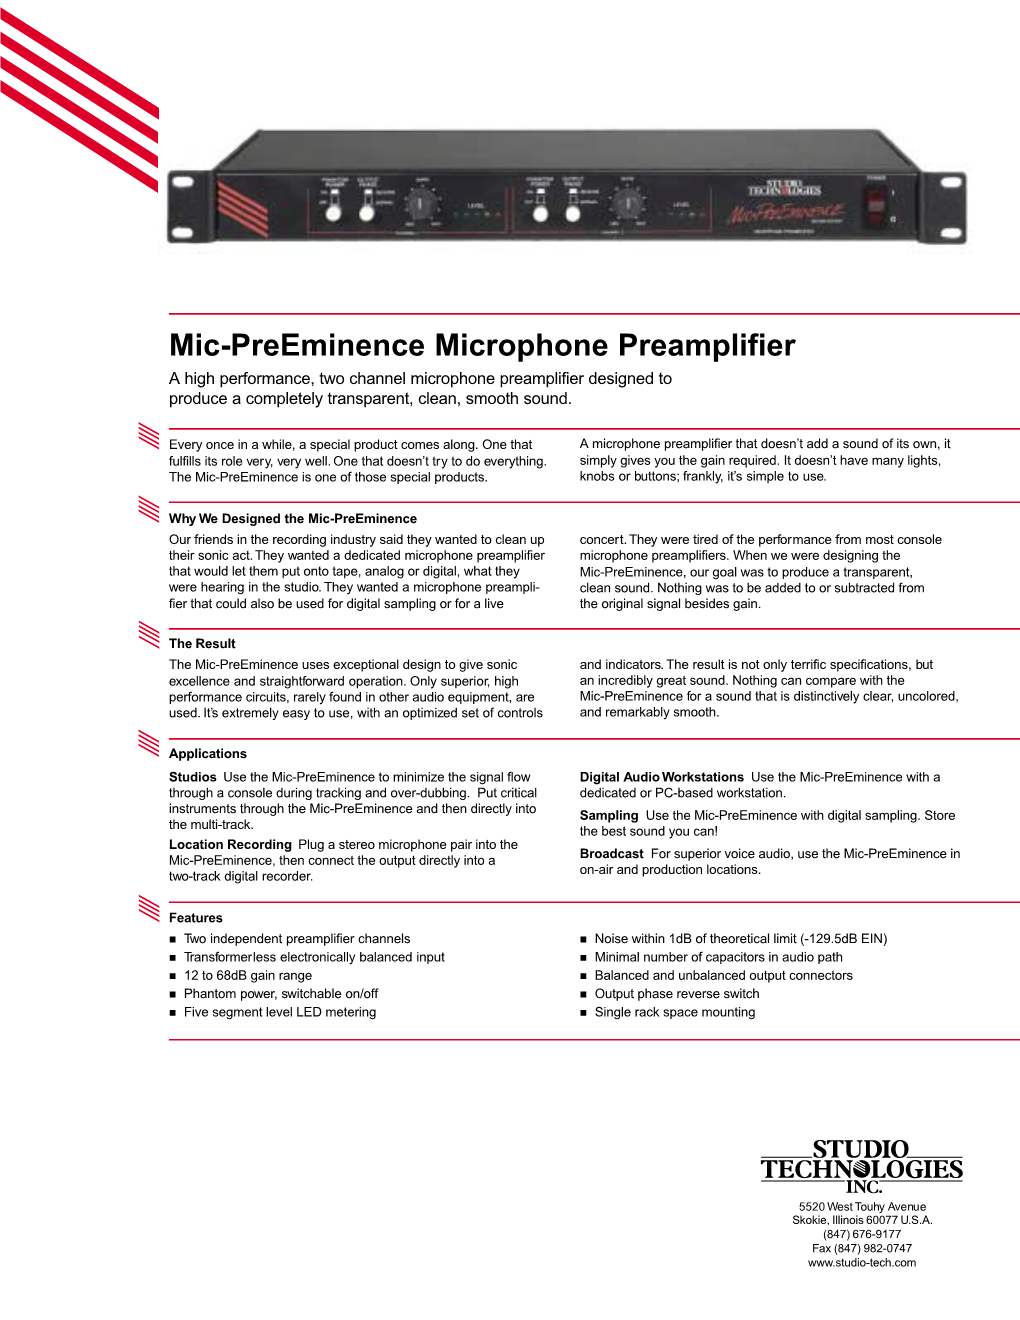 Mic-Preeminence Microphone Preamplifier a High Performance, Two Channel Microphone Preamplifier Designed to Produce a Completely Transparent, Clean, Smooth Sound